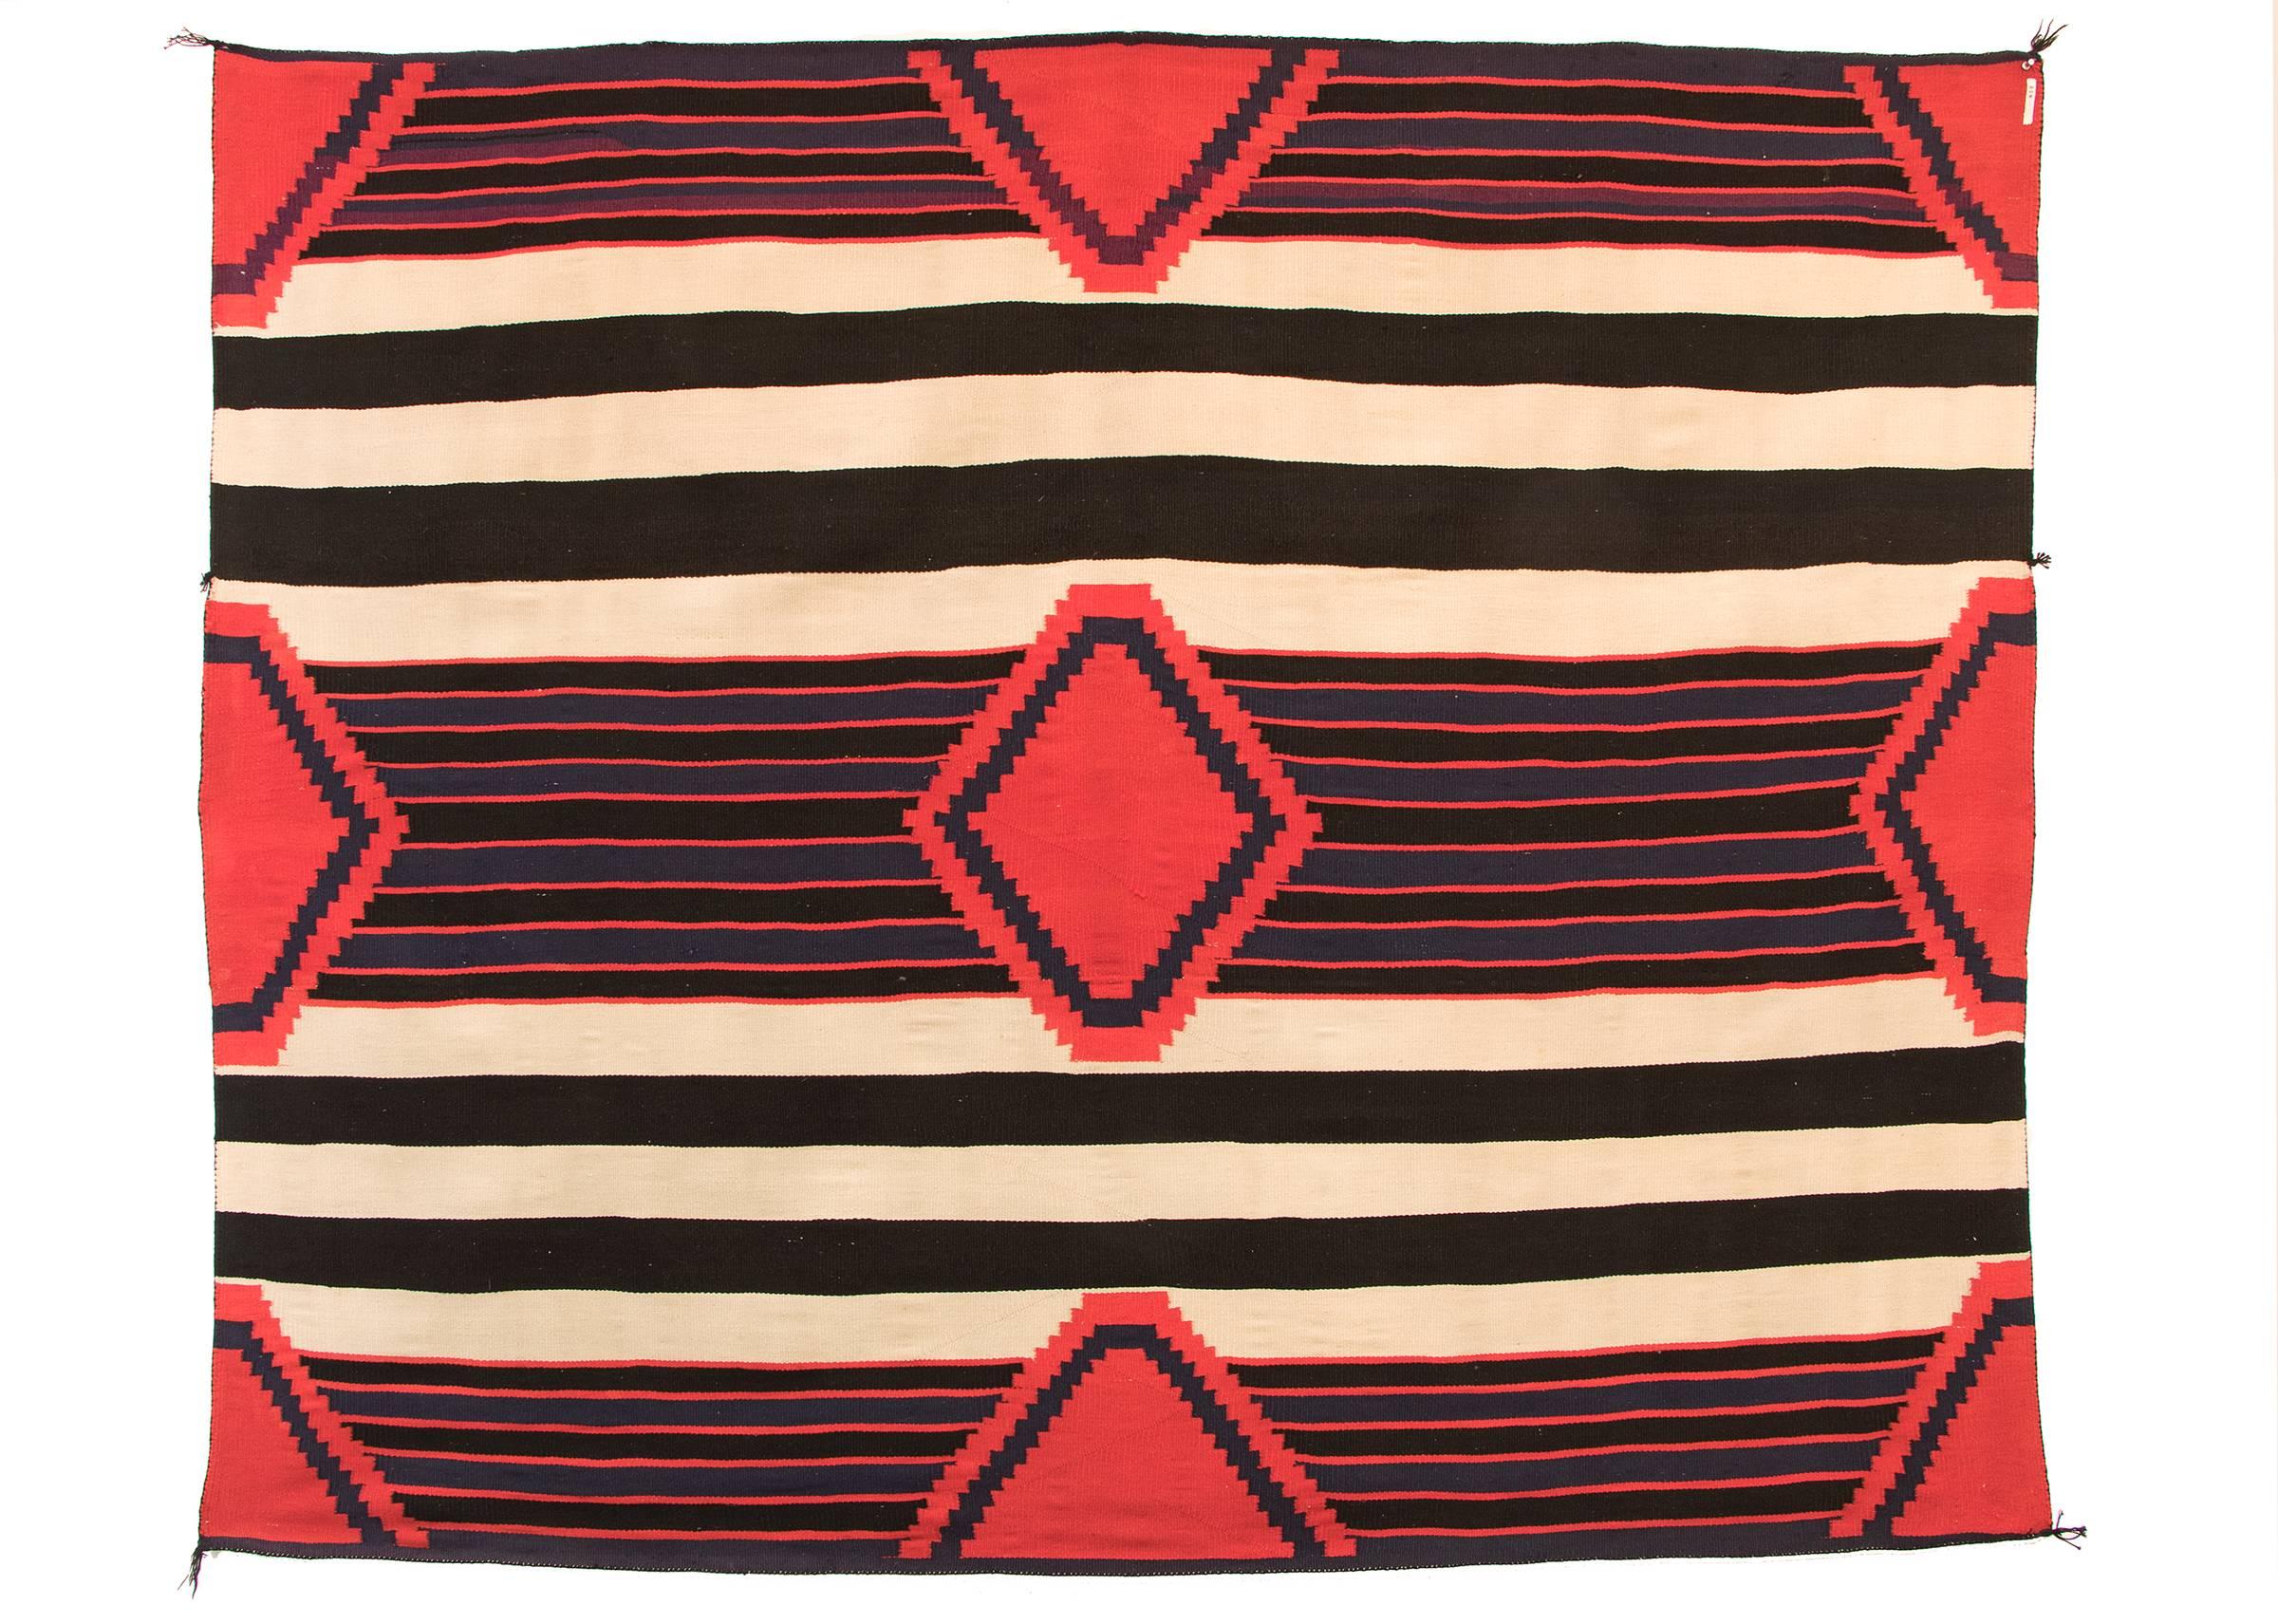 Woven Antique Native American 3rd Phase Chief's Wearing Blanket, Navajo, 19th Century